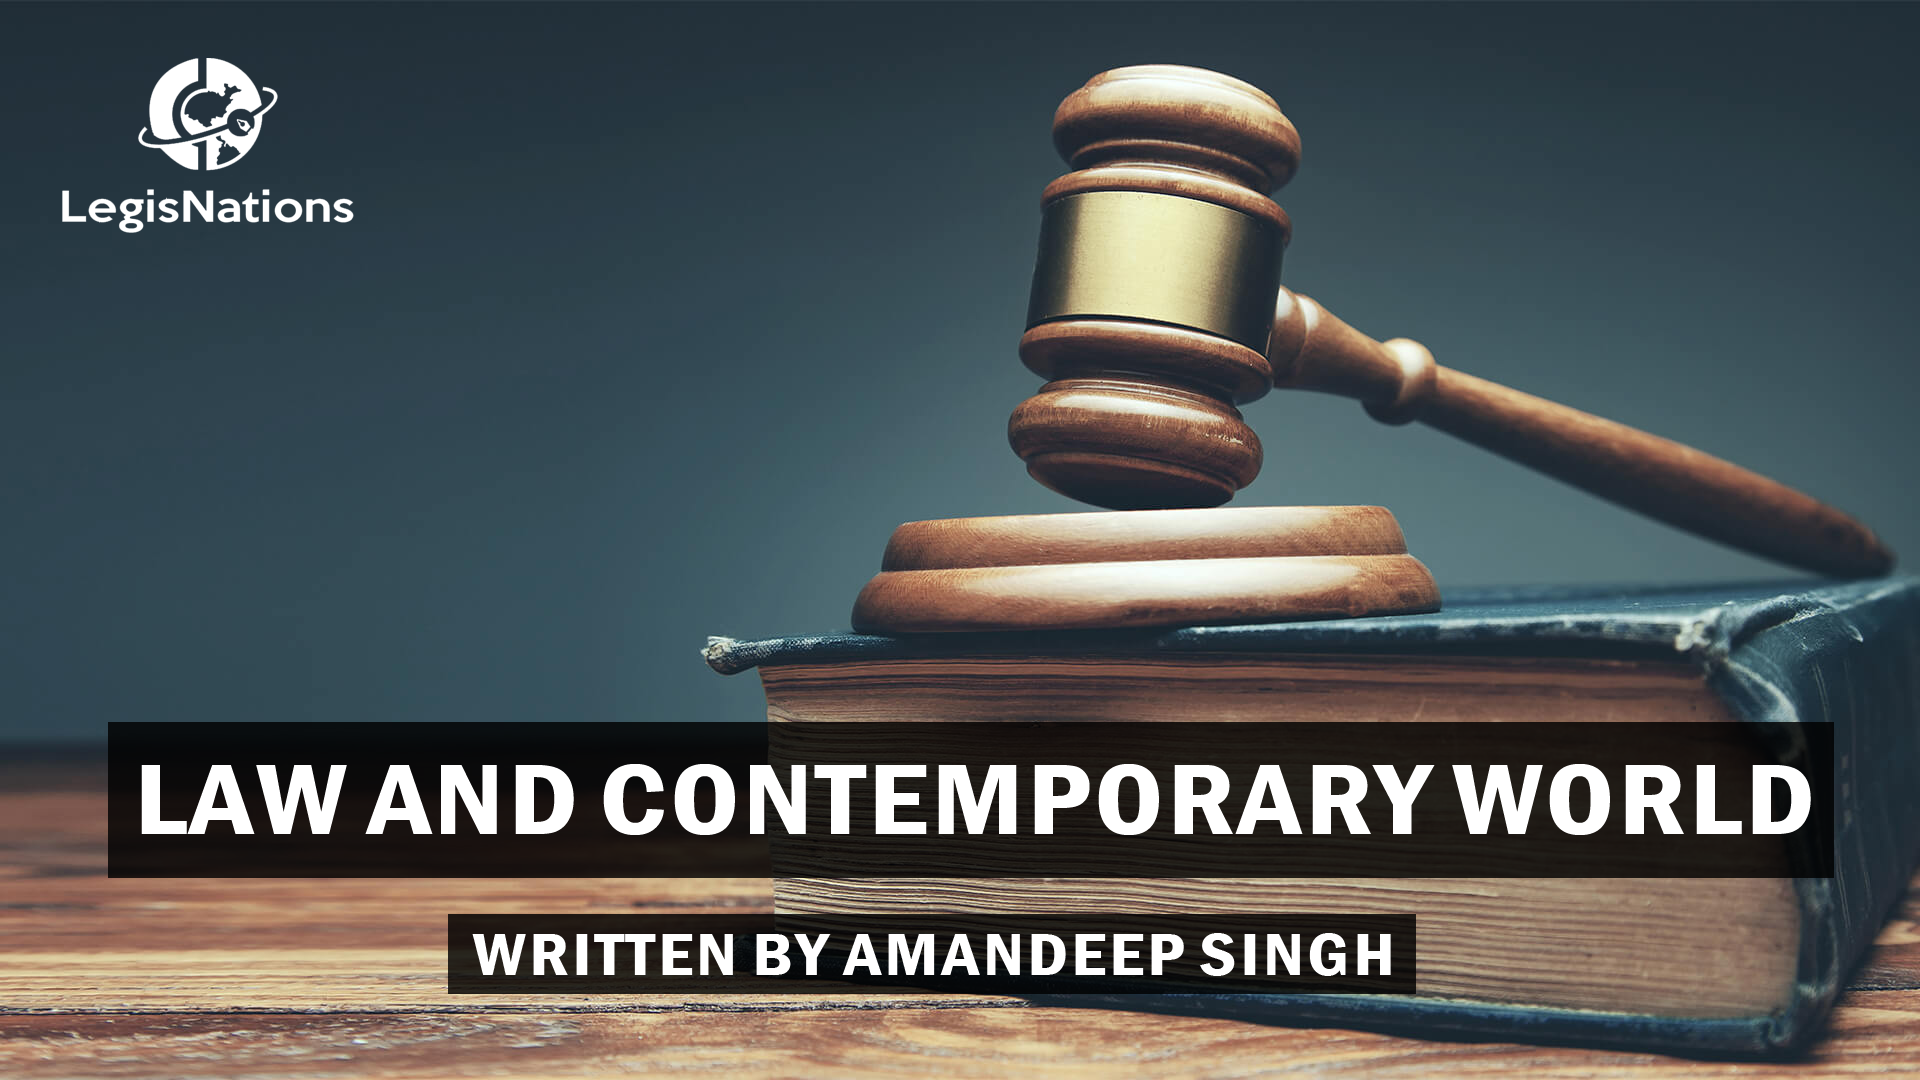 LAW AND CONTEMPORARY WORLD